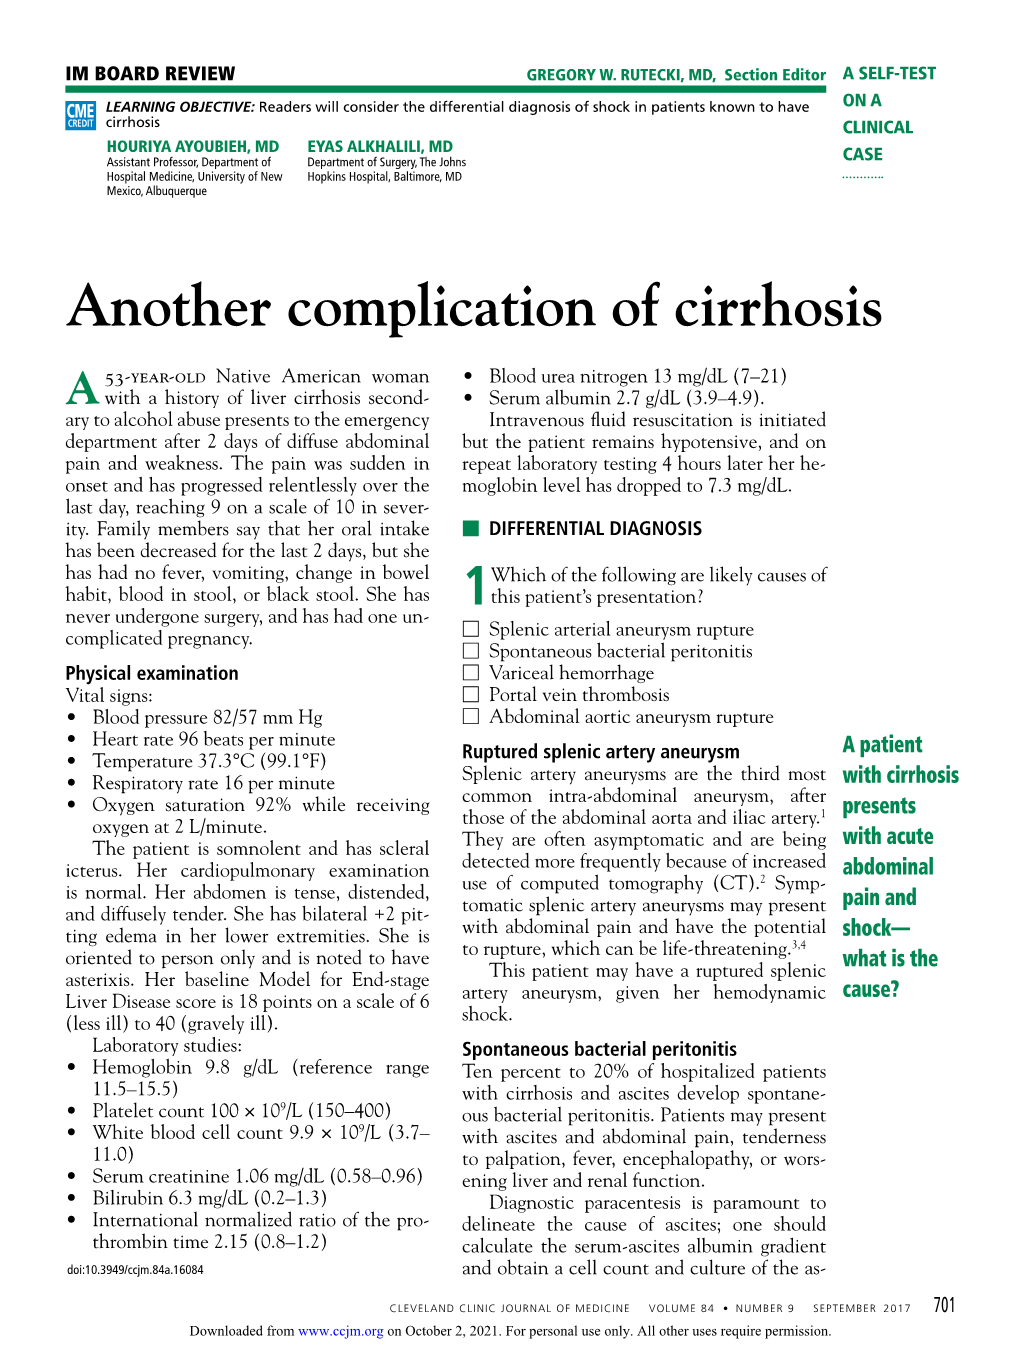 Another Complication of Cirrhosis